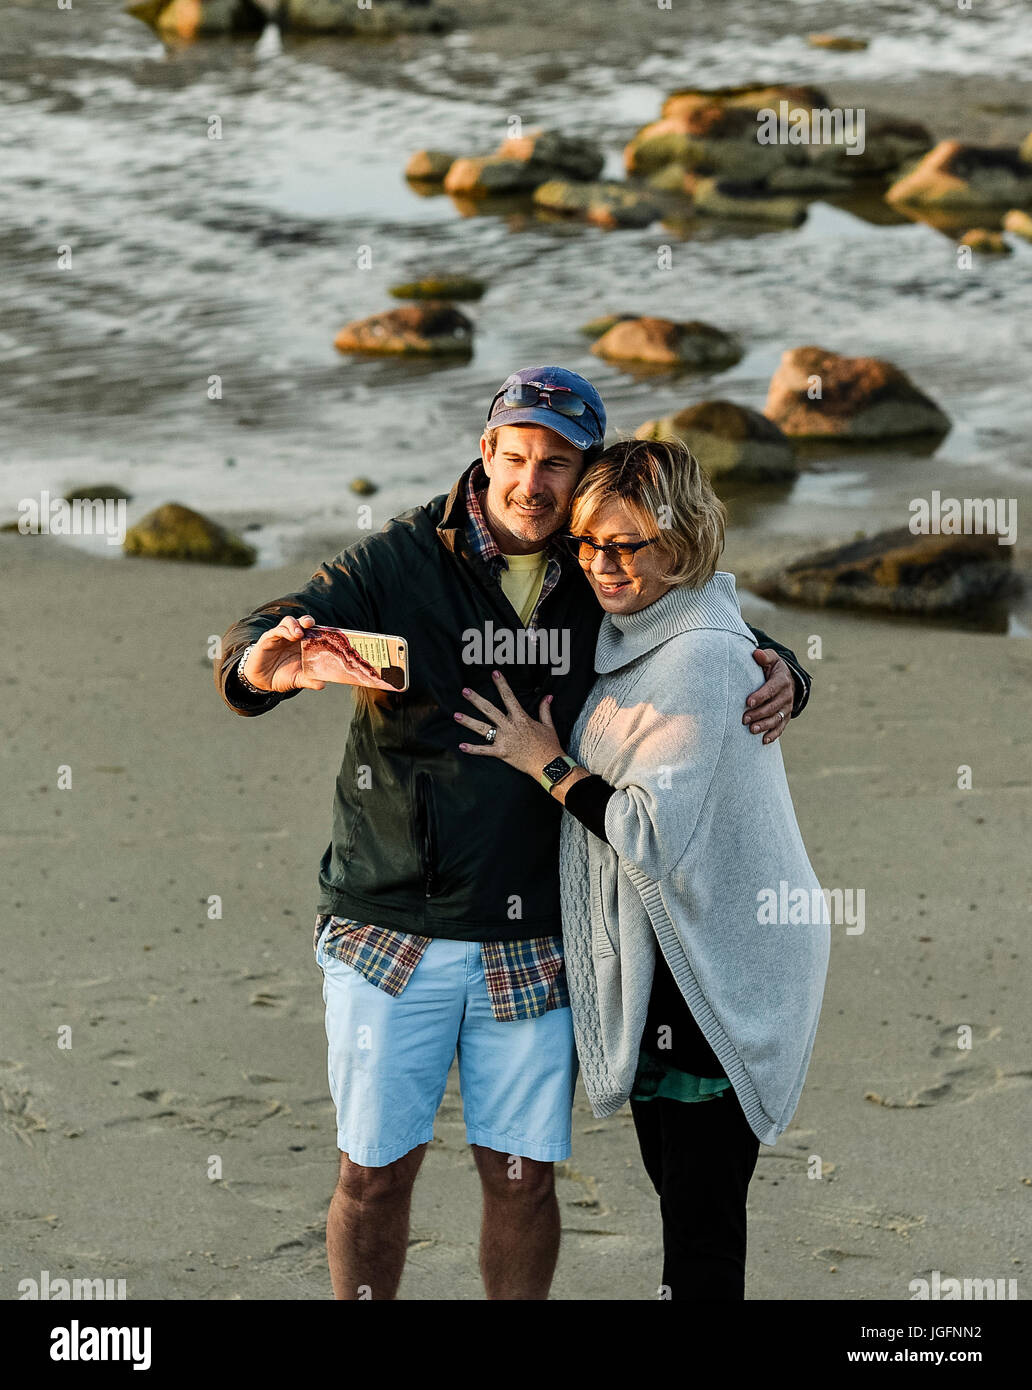 Couple posing for a selfie at the beach. Stock Photo